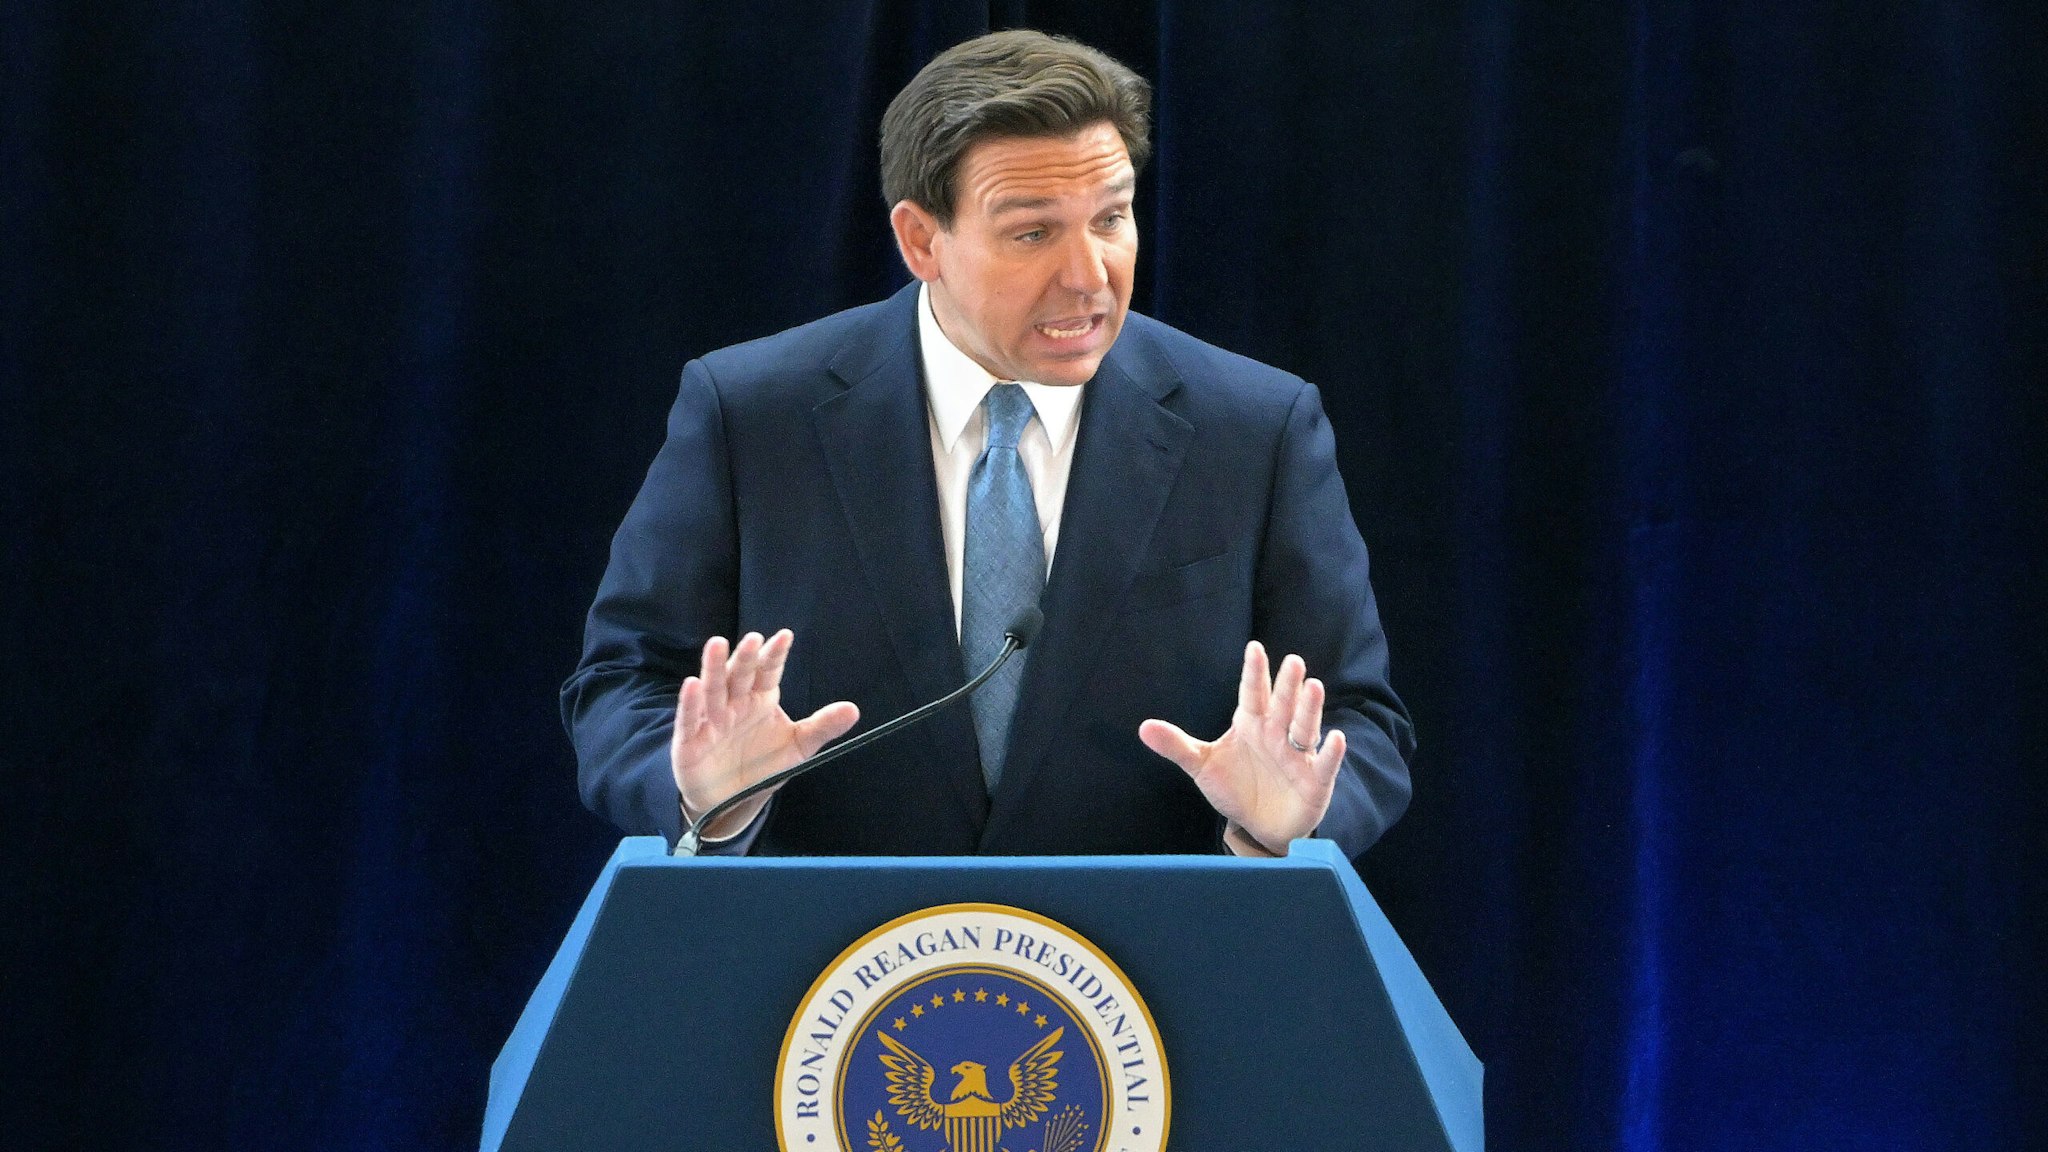 Simi Valley, California March 5, 2023-Florida Governor Ron DeSantis speaks to donors at the Ronald Reagan Library Sunday in Simi Valley.